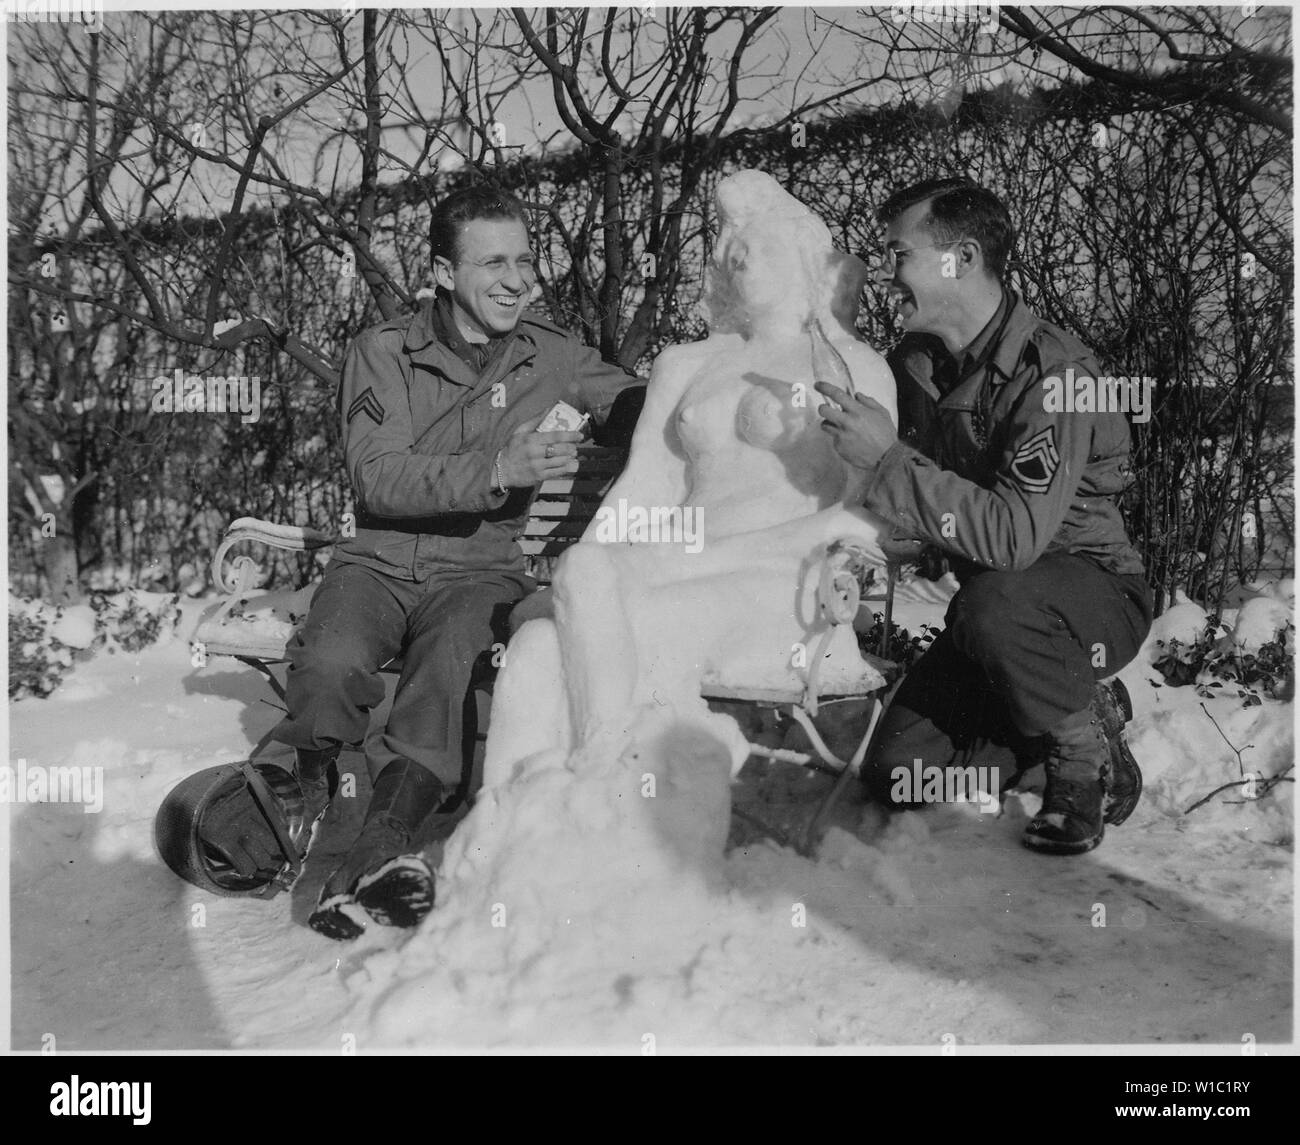 Corporal. Bernard Butnik, Cleveland Heights, Ohio, and Sergeant. Richard Goodbar, Russellville, Arkansas, offer Agnes their snow woman, cigarettes and a coke. European theater, January 14, 1945.; General notes:  Use War and Conflict Number 893 when ordering a reproduction or requesting information about this image. Stock Photo